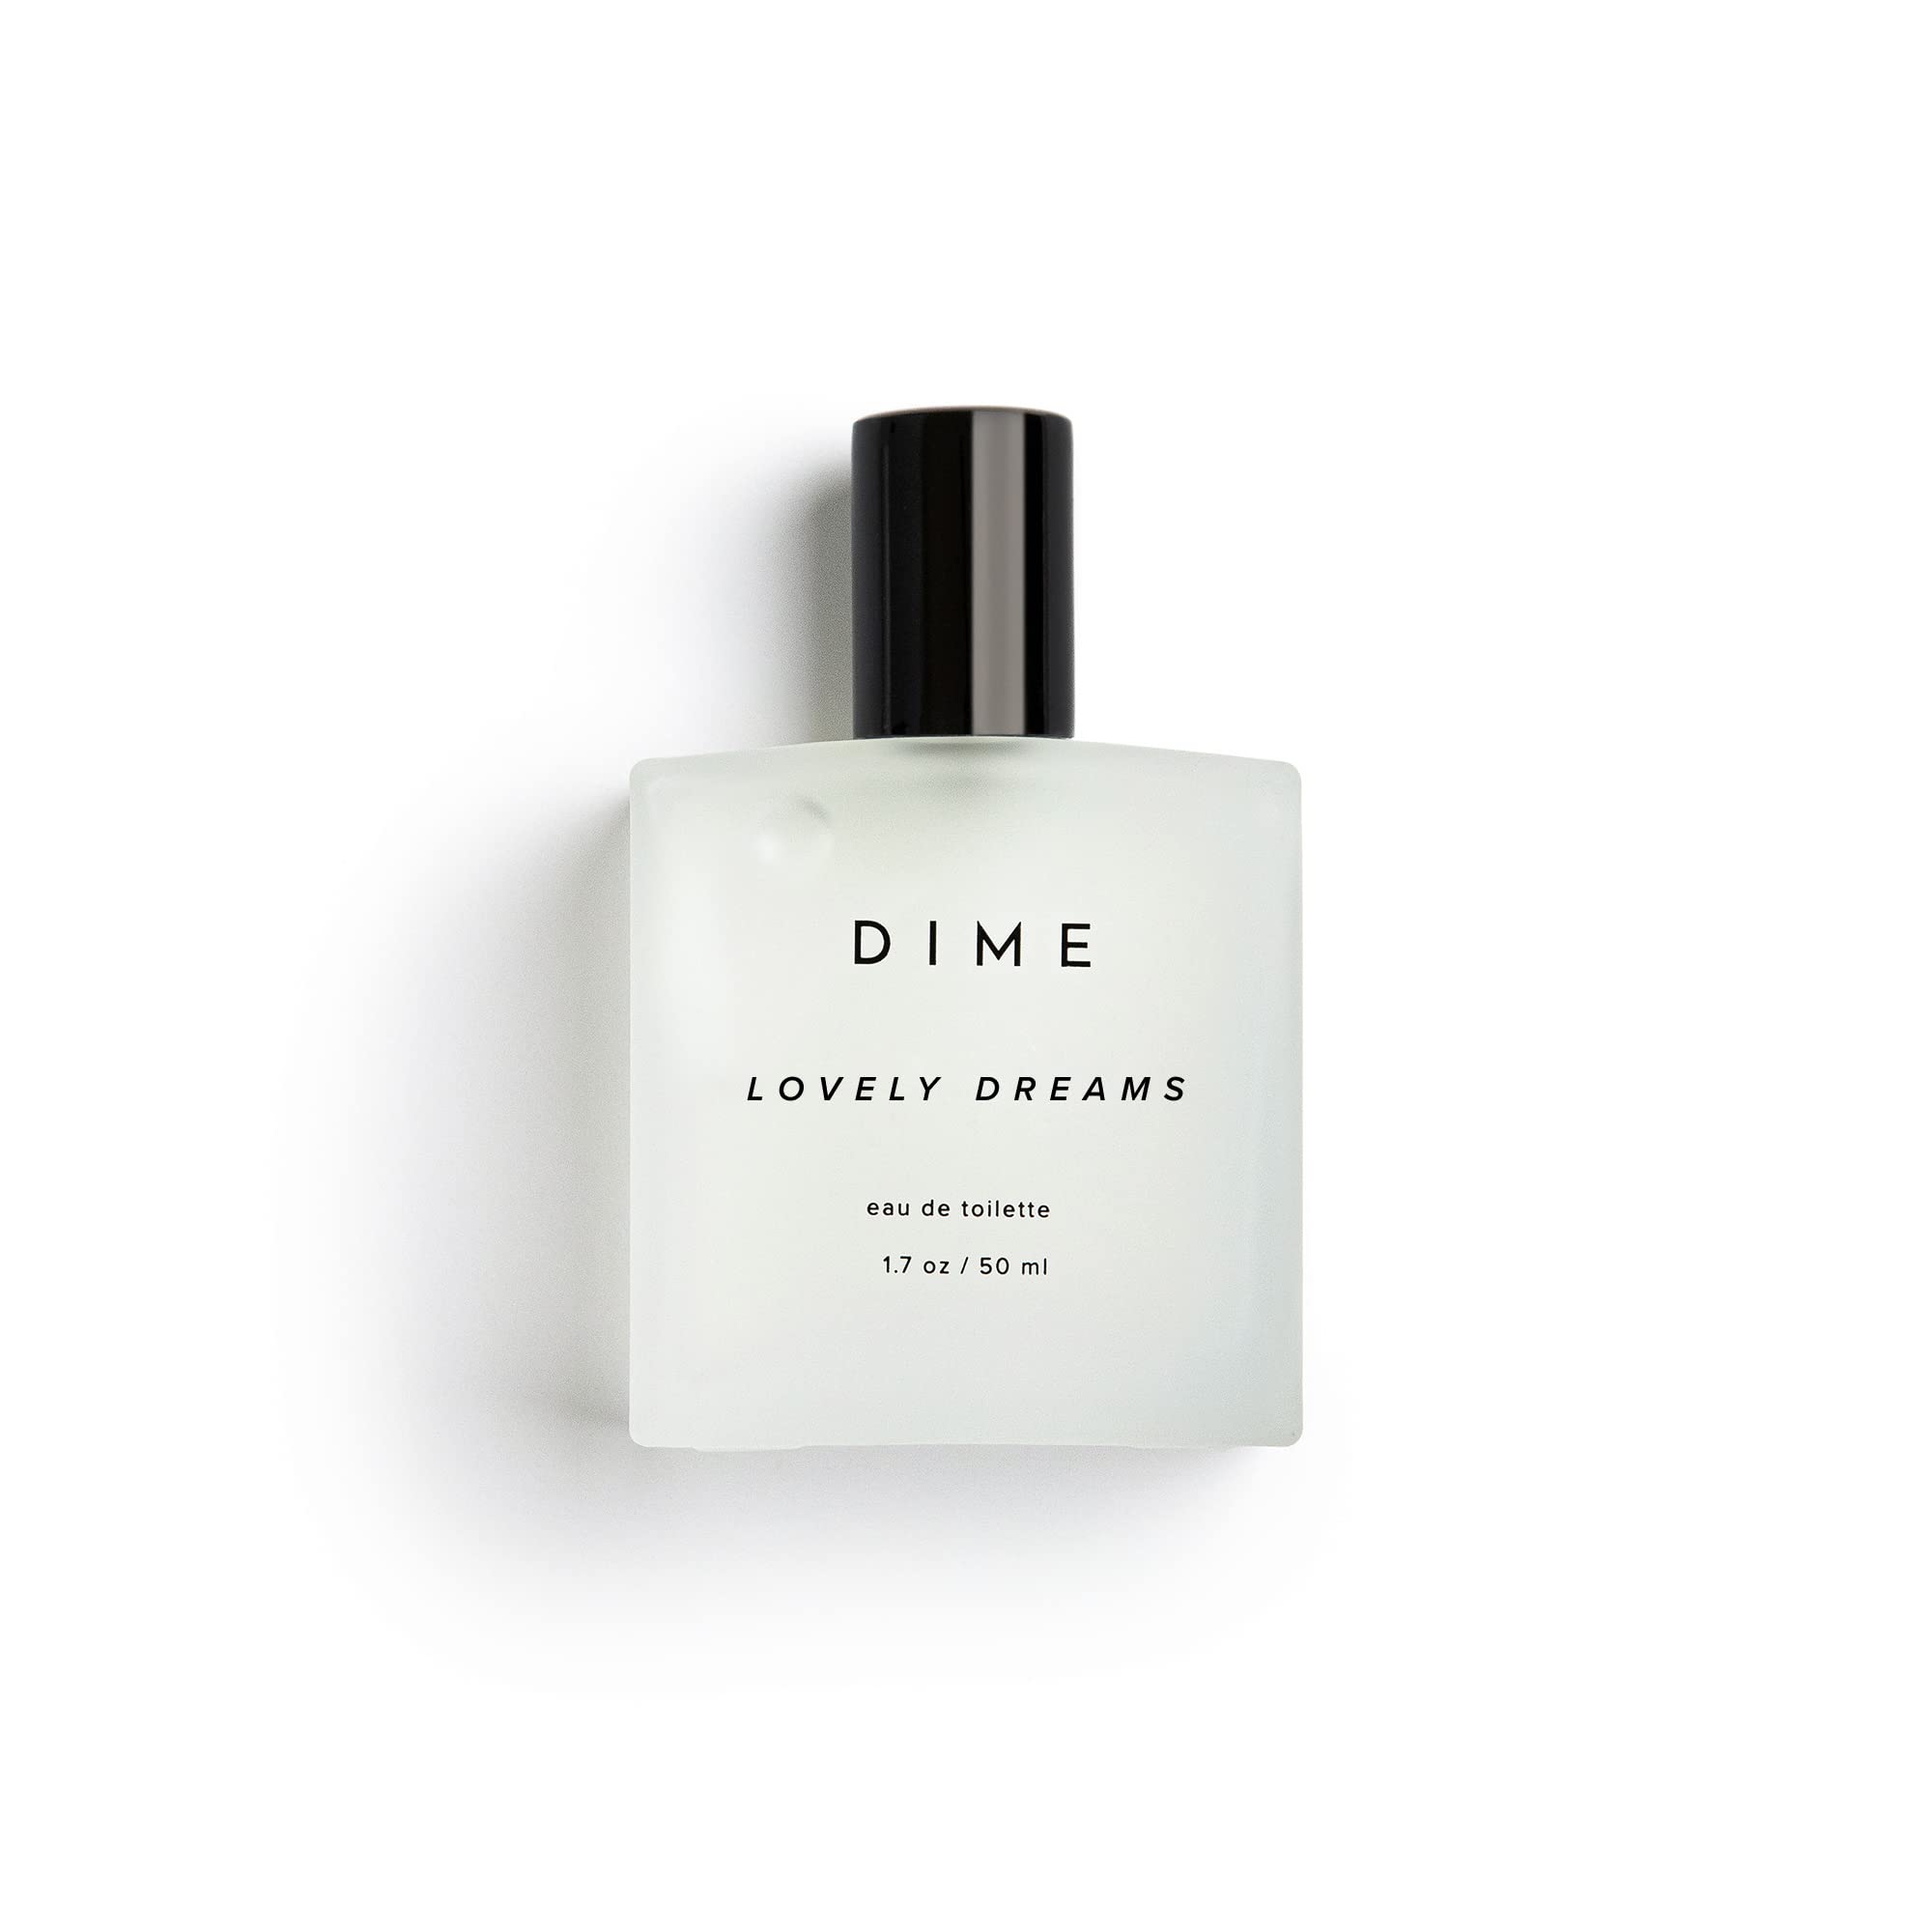 DIME Beauty Perfume Lovely Sweet Dreams, Warm Vanilla and Floral Scent, Hypoallergenic, Clean Perfume, Eau de Toilette For Women, 1.7 oz / 50 ml (Packaging May Vary)